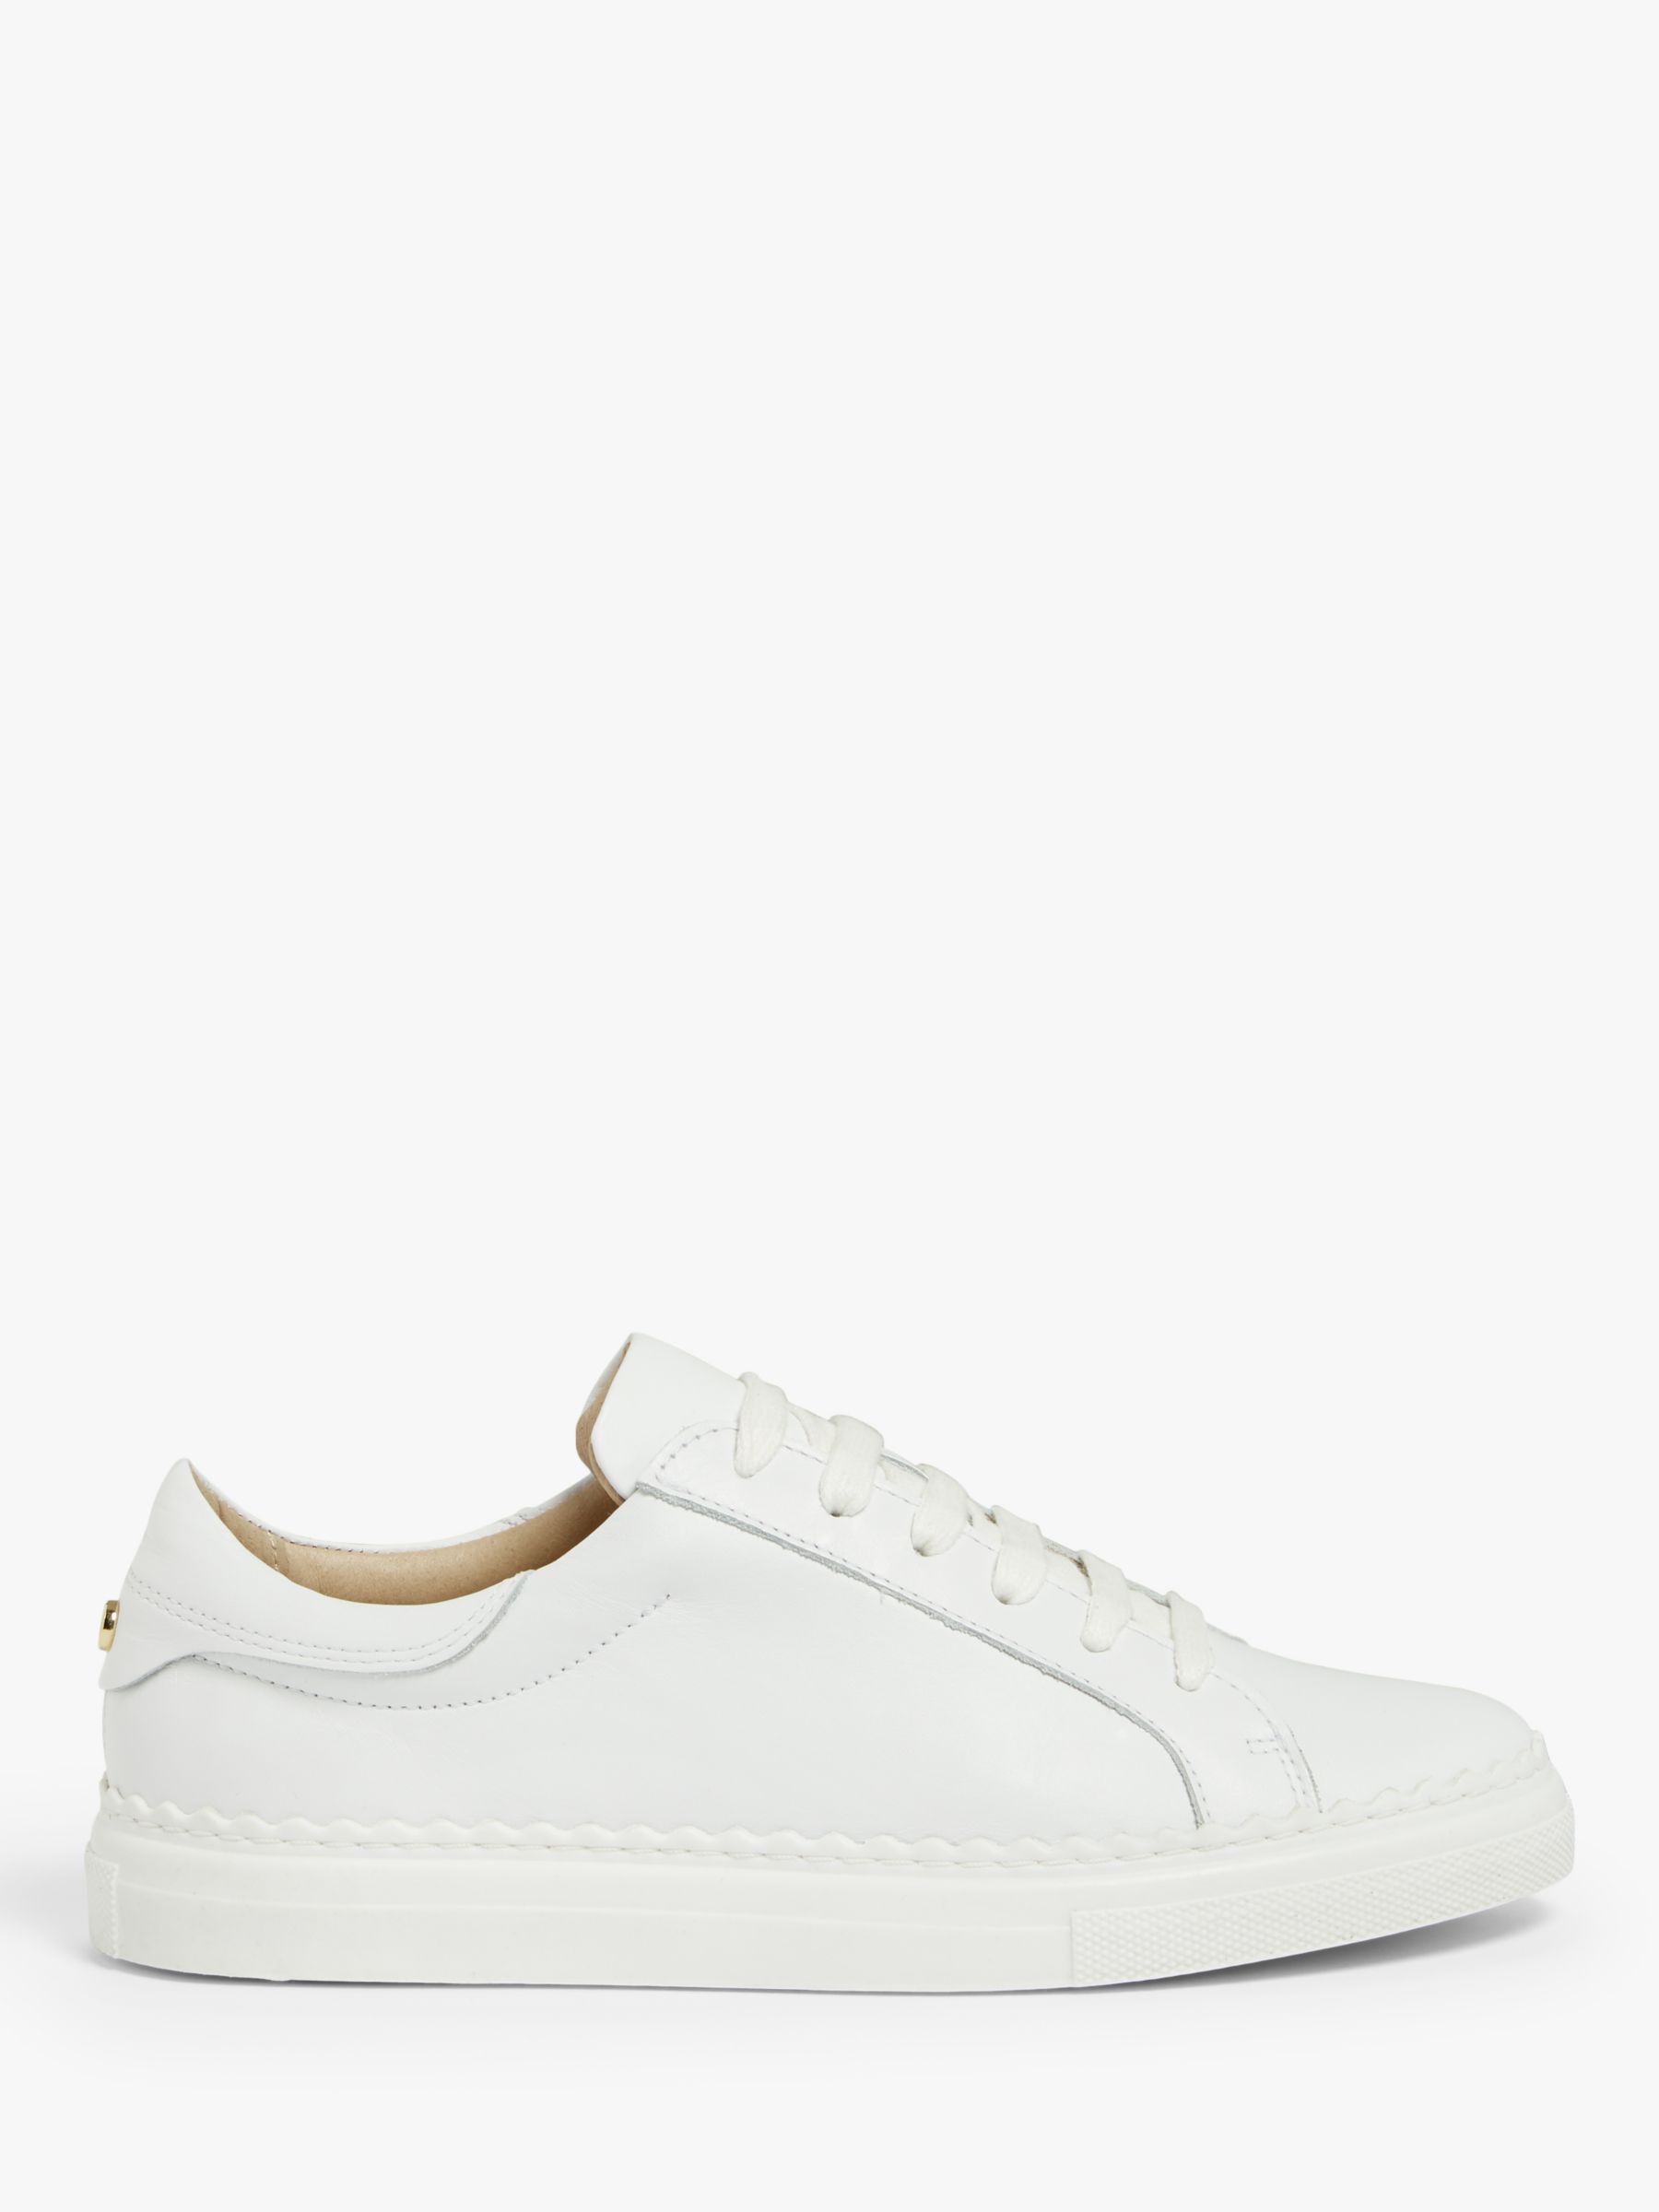 White Trainers To Wear With Dresses | John Lewis & Partners